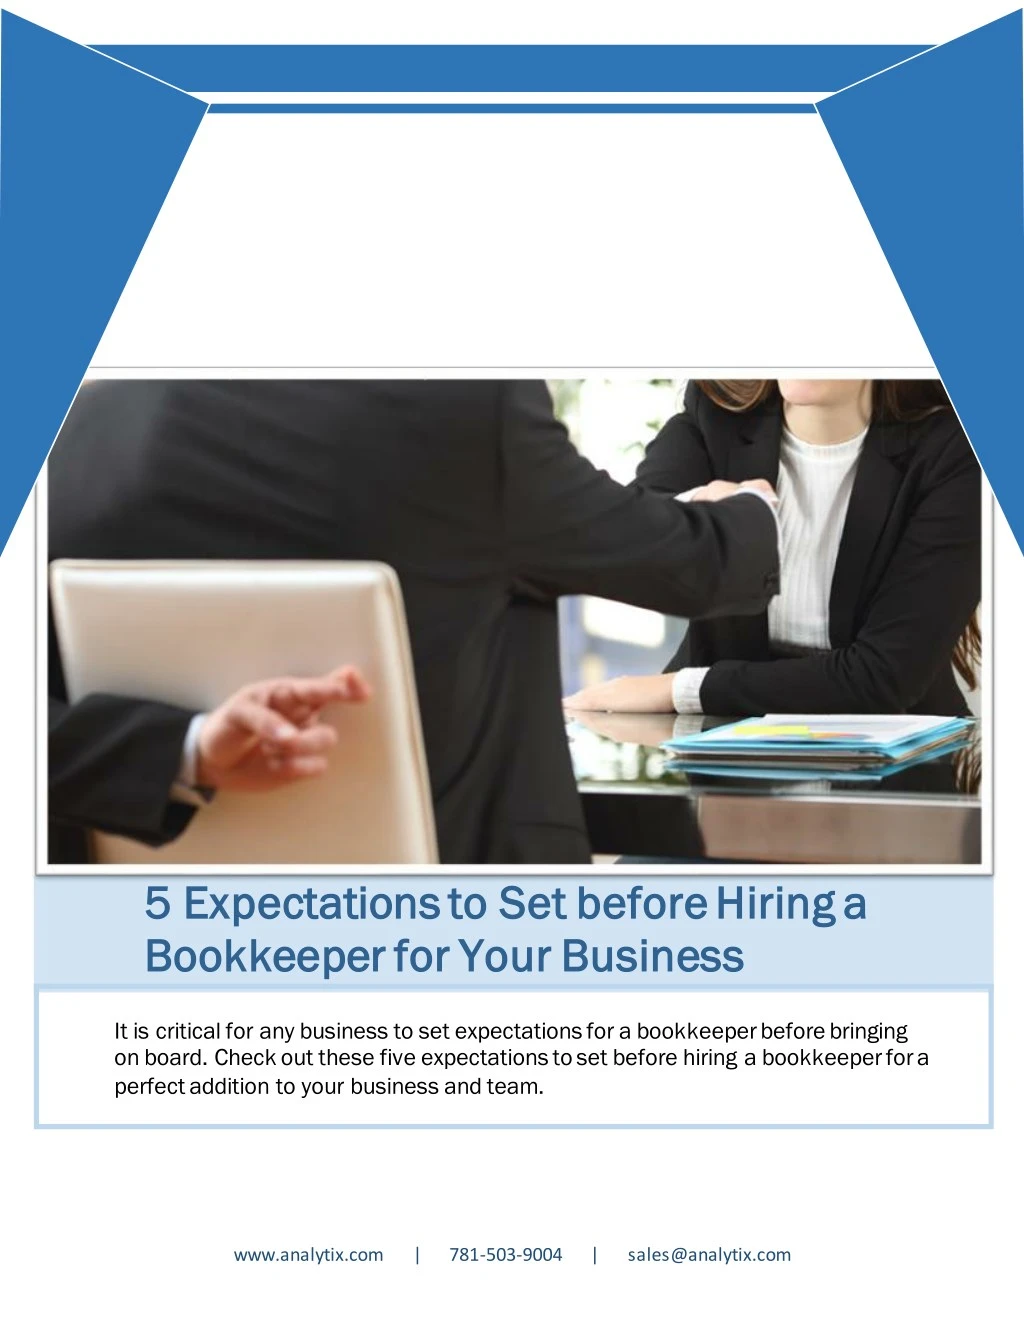 5 expectations to set before hiring